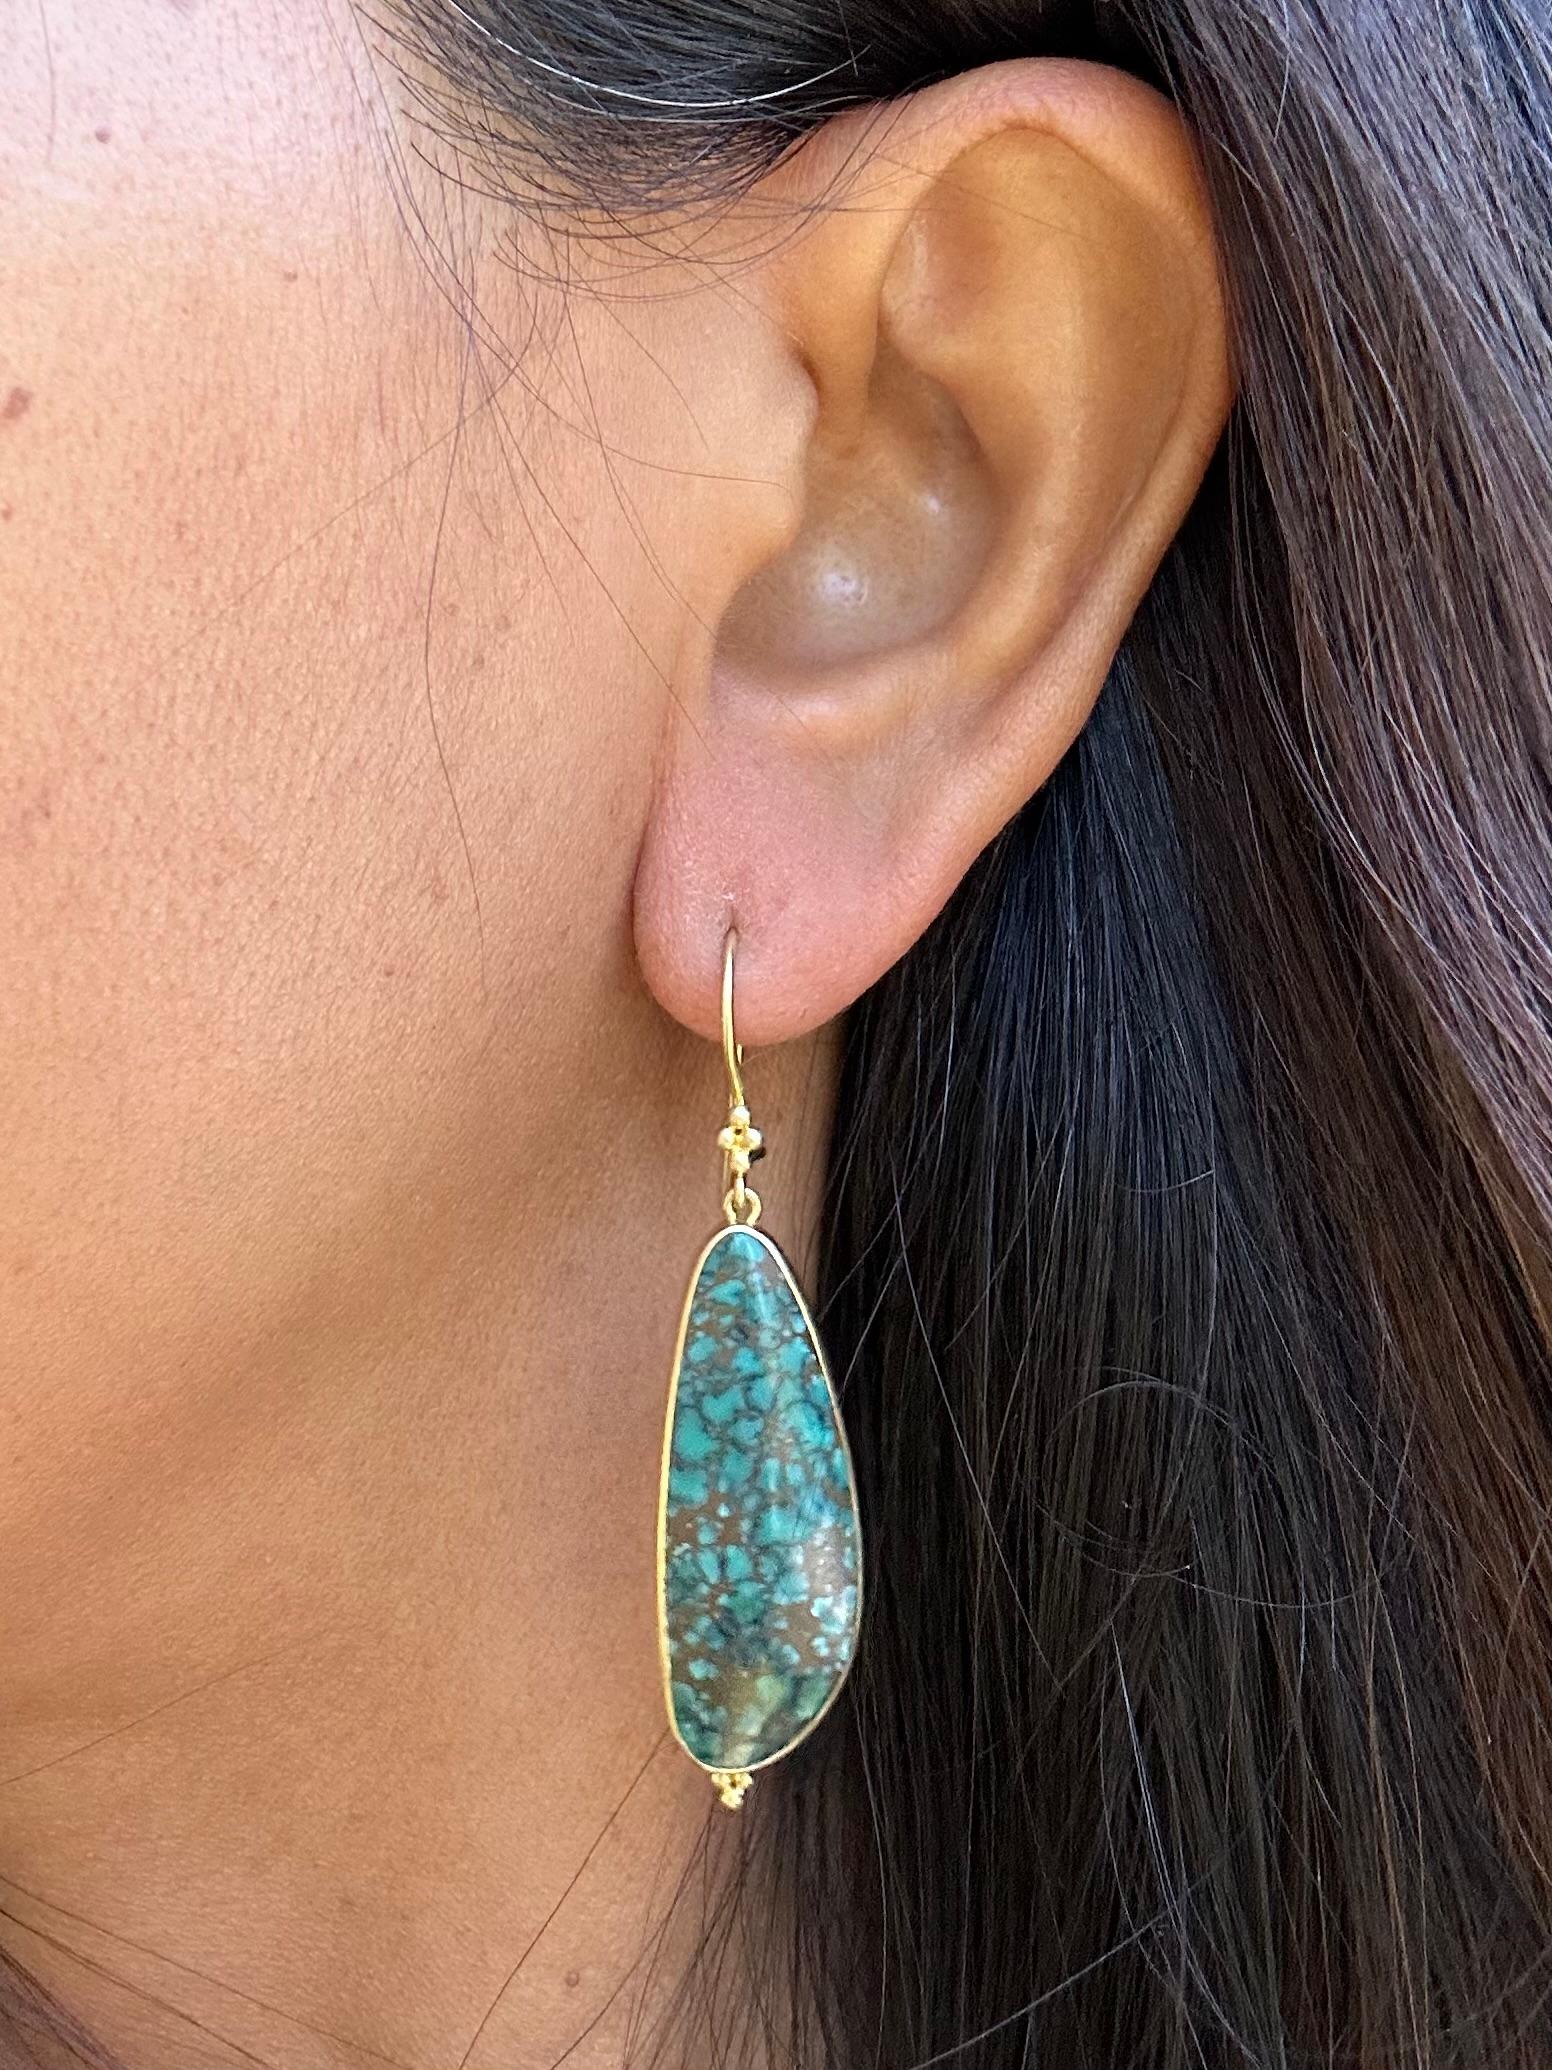 Cabochon Steven Battelle 24.1 Carats Variegated Turquoise 18K Gold Wire Earrings For Sale